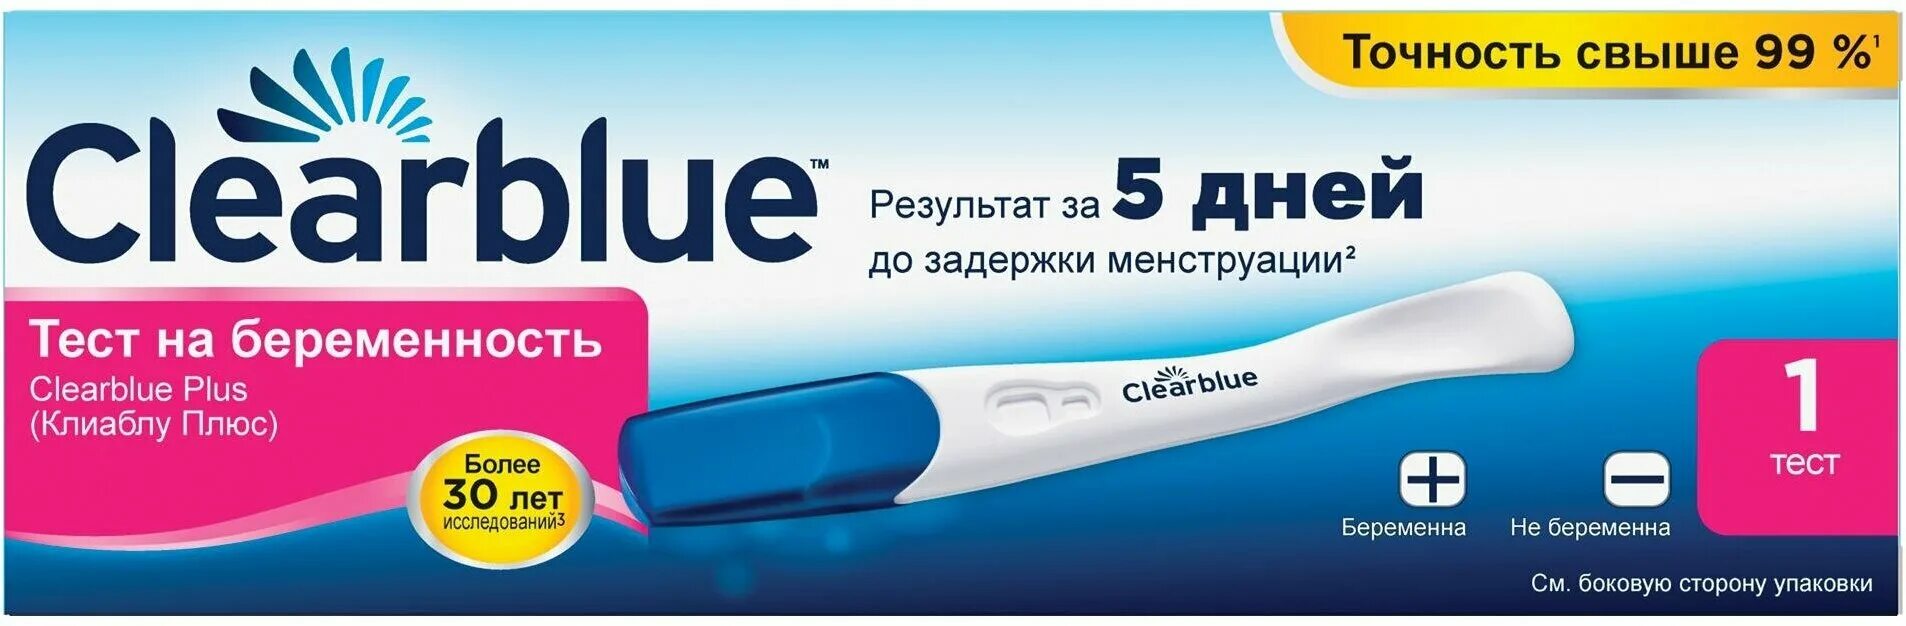 Clearblue тест на беременность результат. Тест на беременность Clearblue. Клиаблу тест на беременность. Тест Clearblue Plus на беременность. Результаты теста на беременность Clearblue.